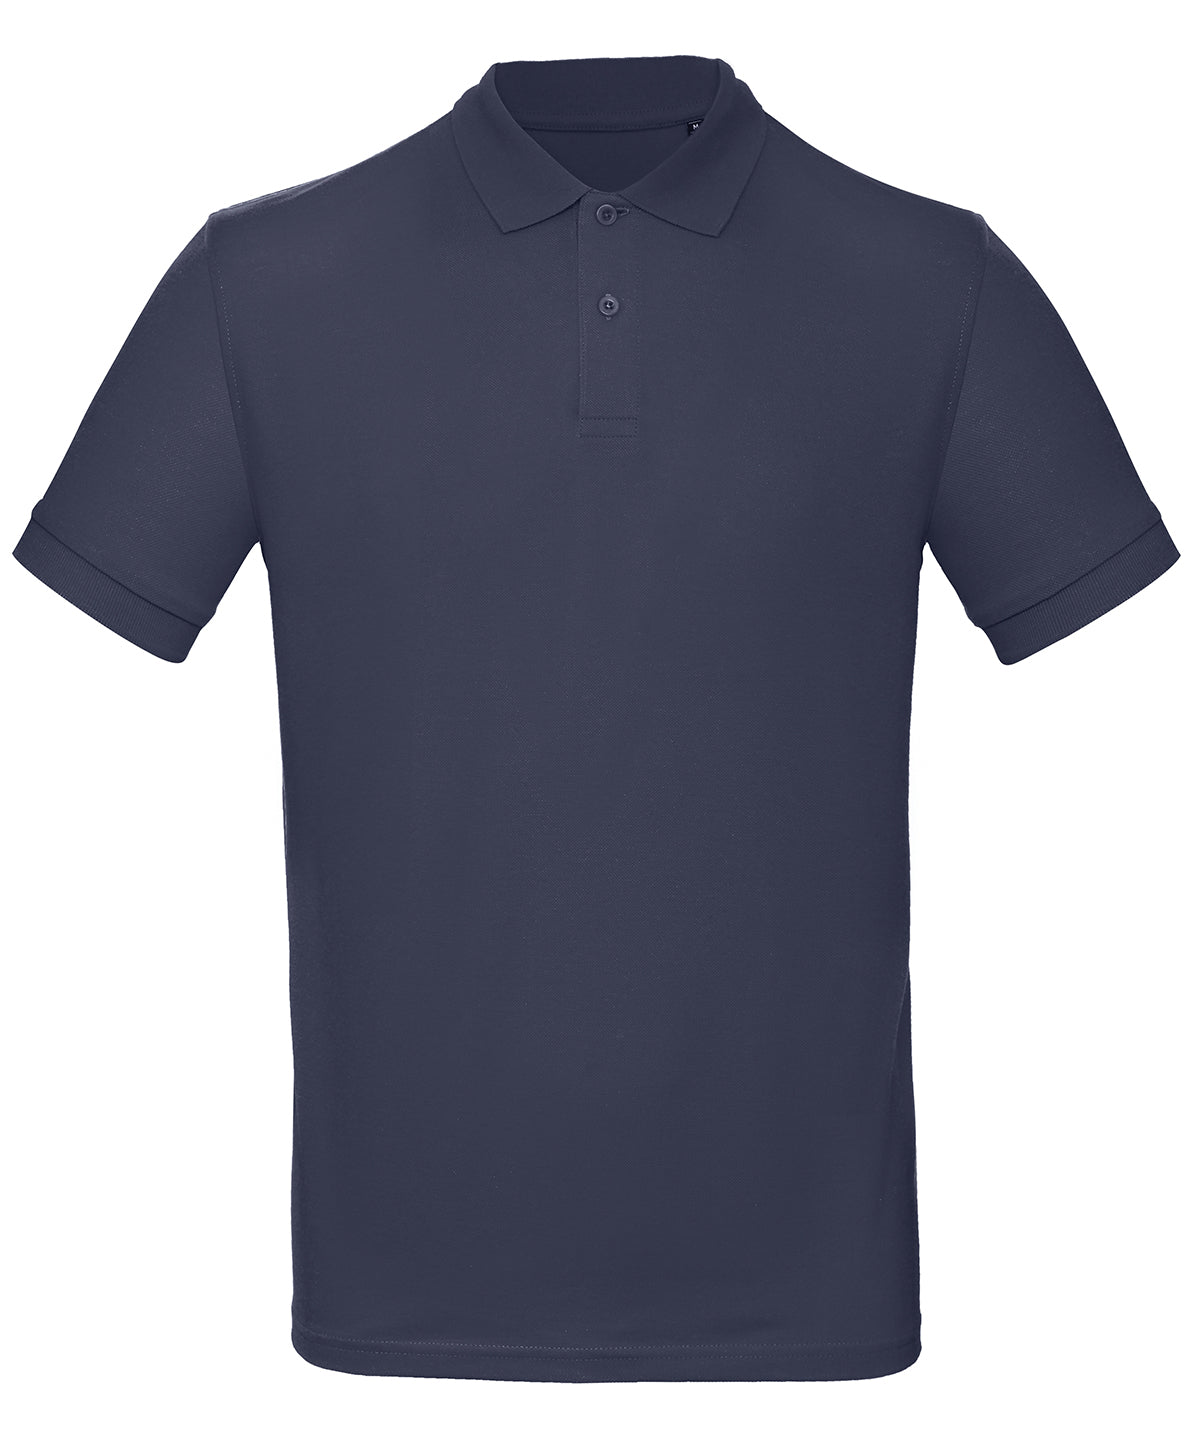 Personalised Polo Shirts - Turquoise B&C Collection B&C Inspire Polo /men